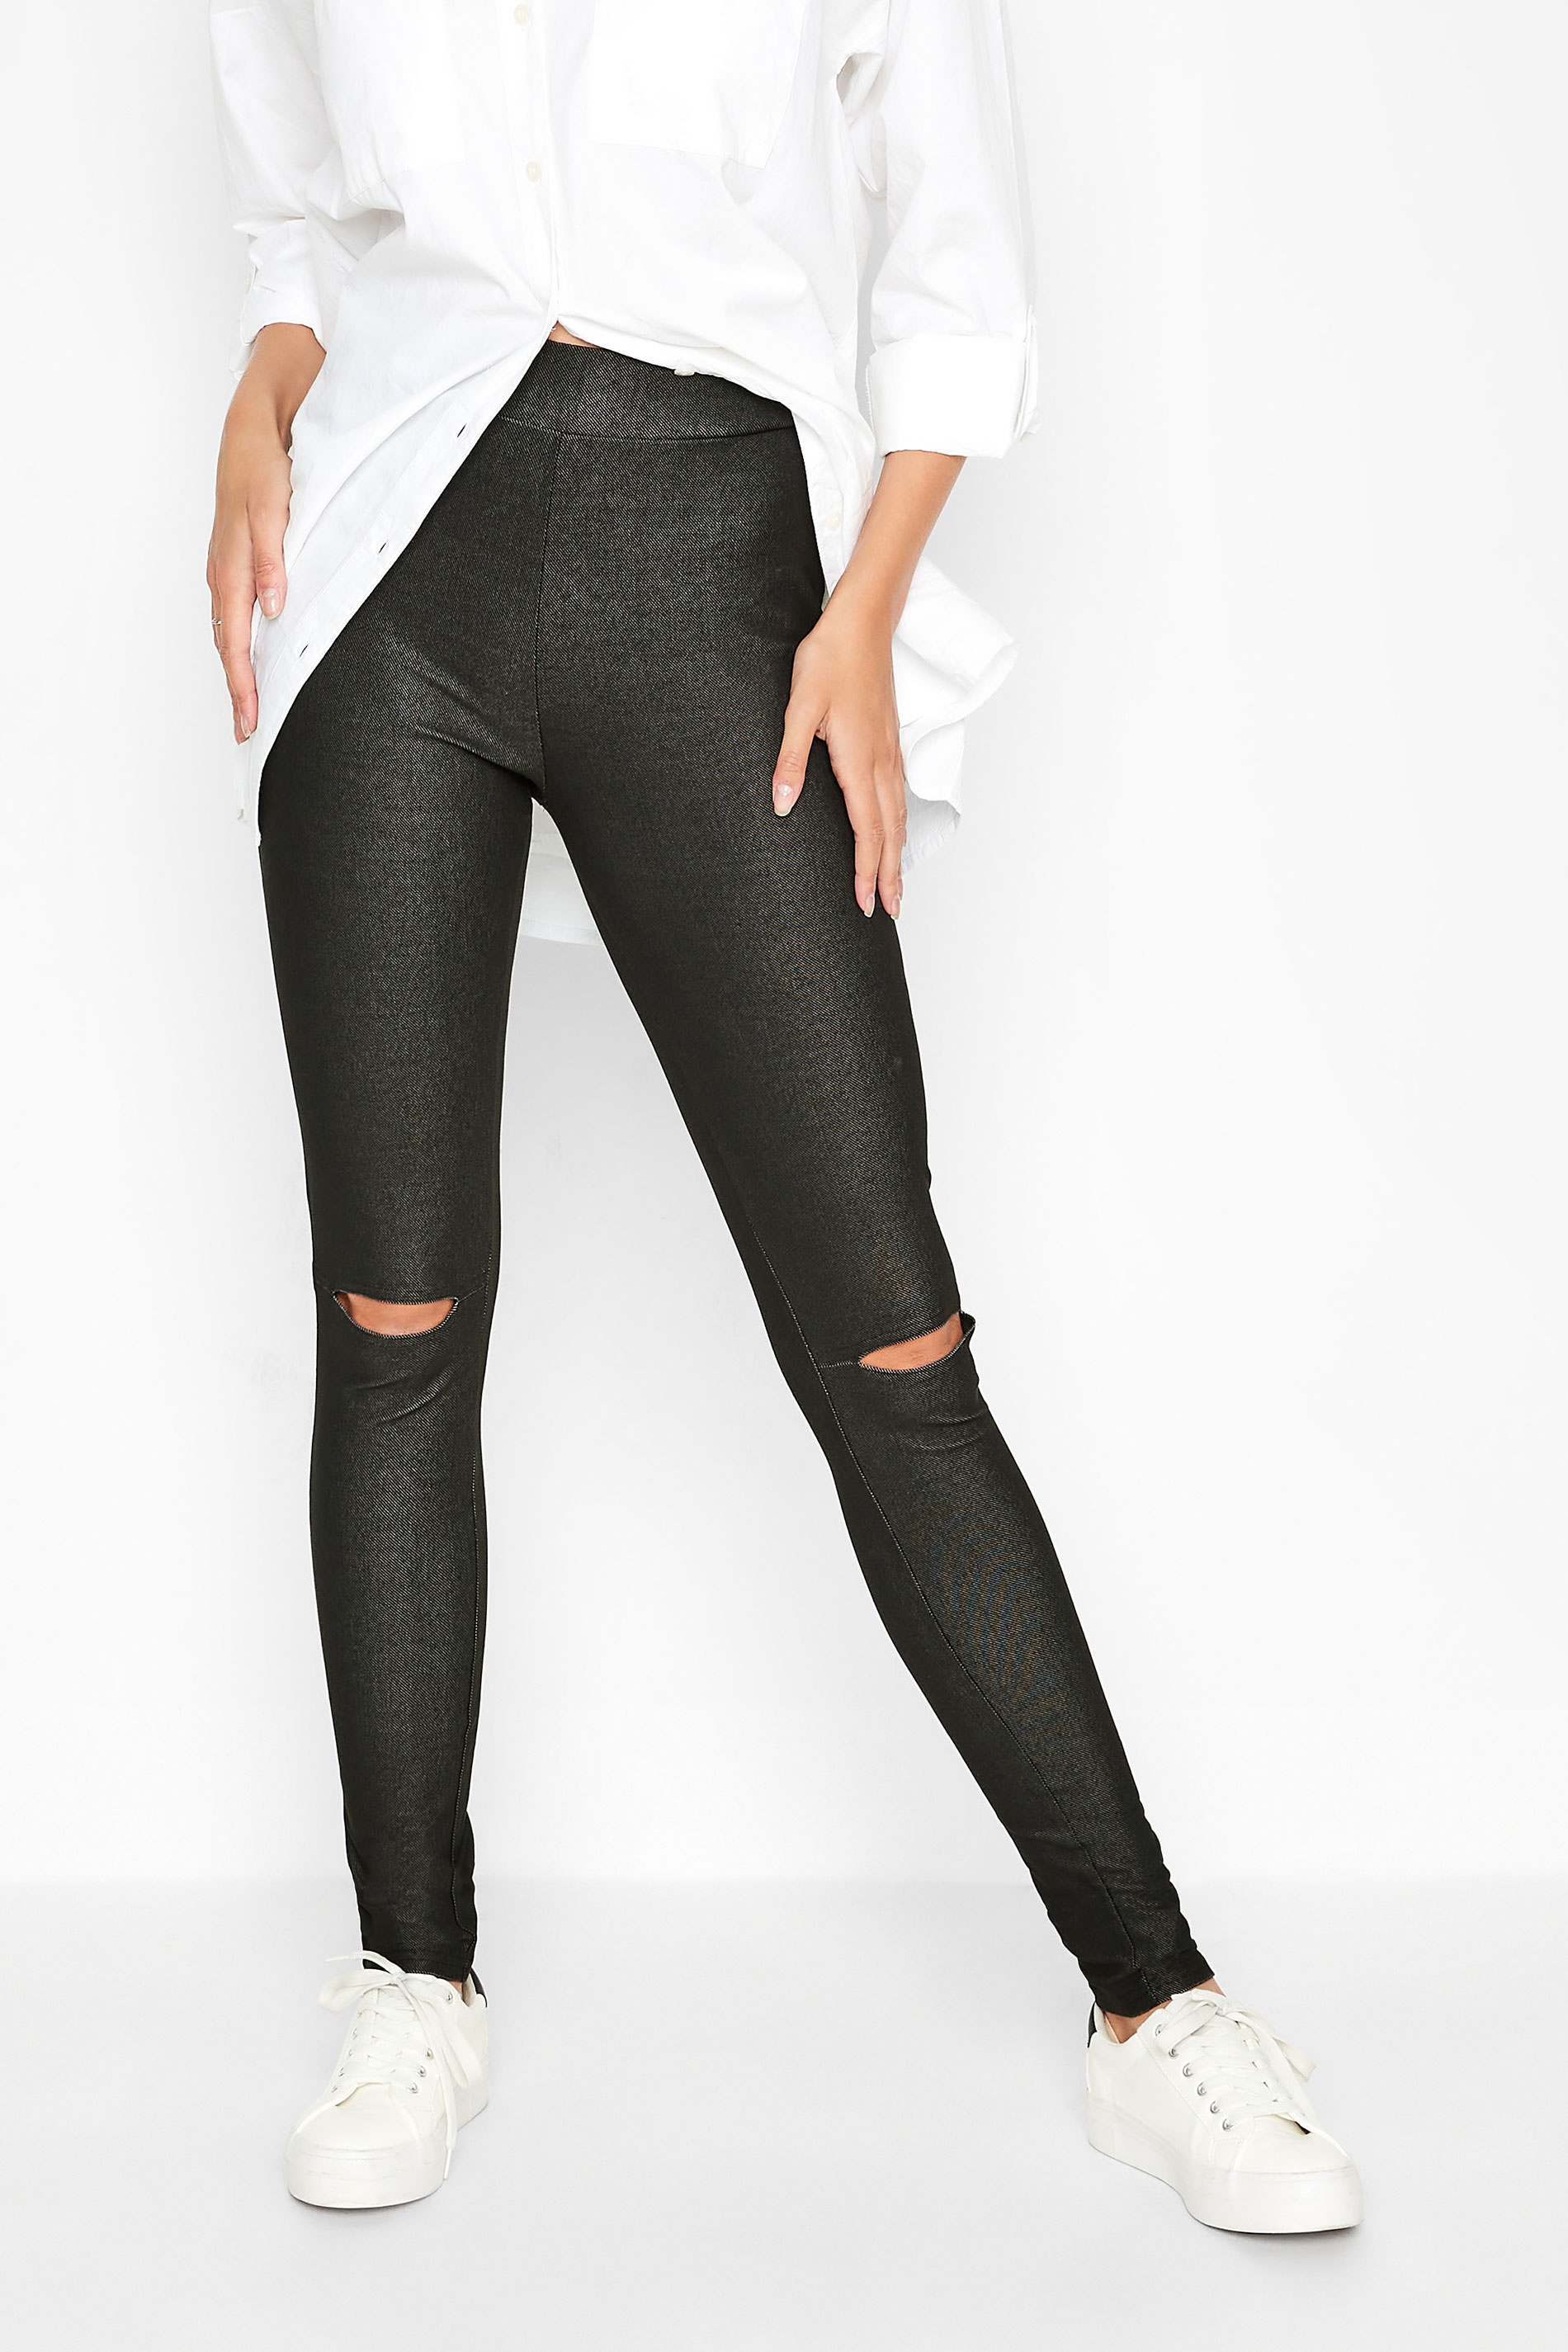 LTS Black Ripped Knee Jersey Jeggings